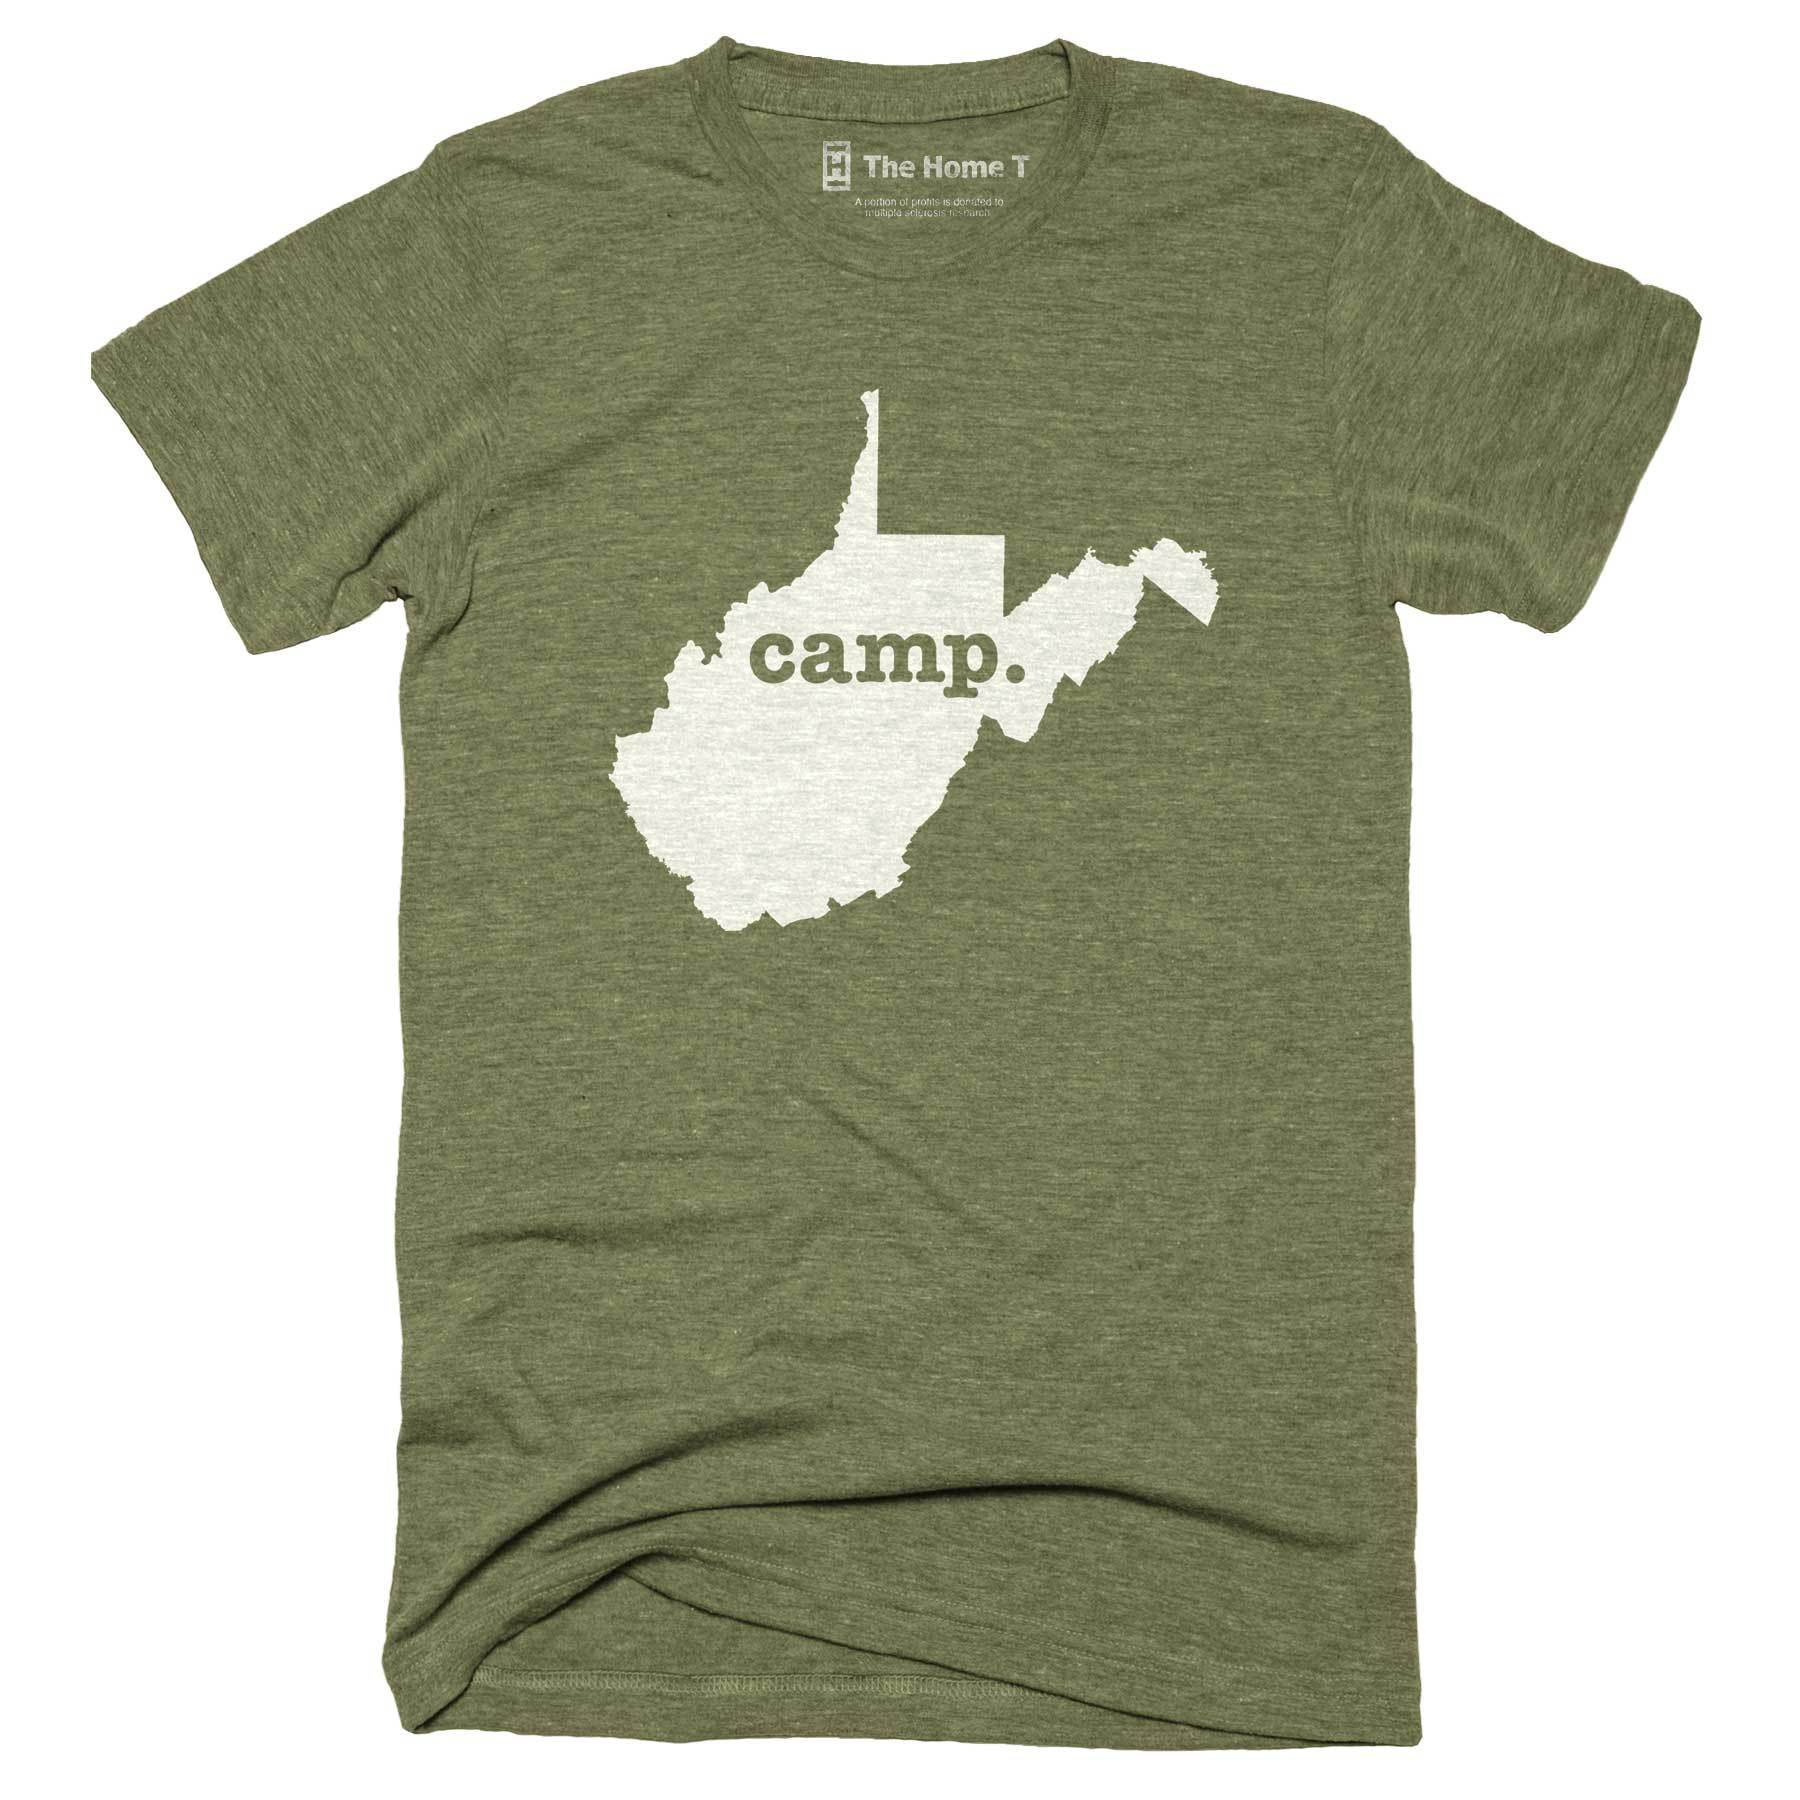 West Virginia Camp Home T-Shirt Outdoor Collection The Home T XXL Army Green